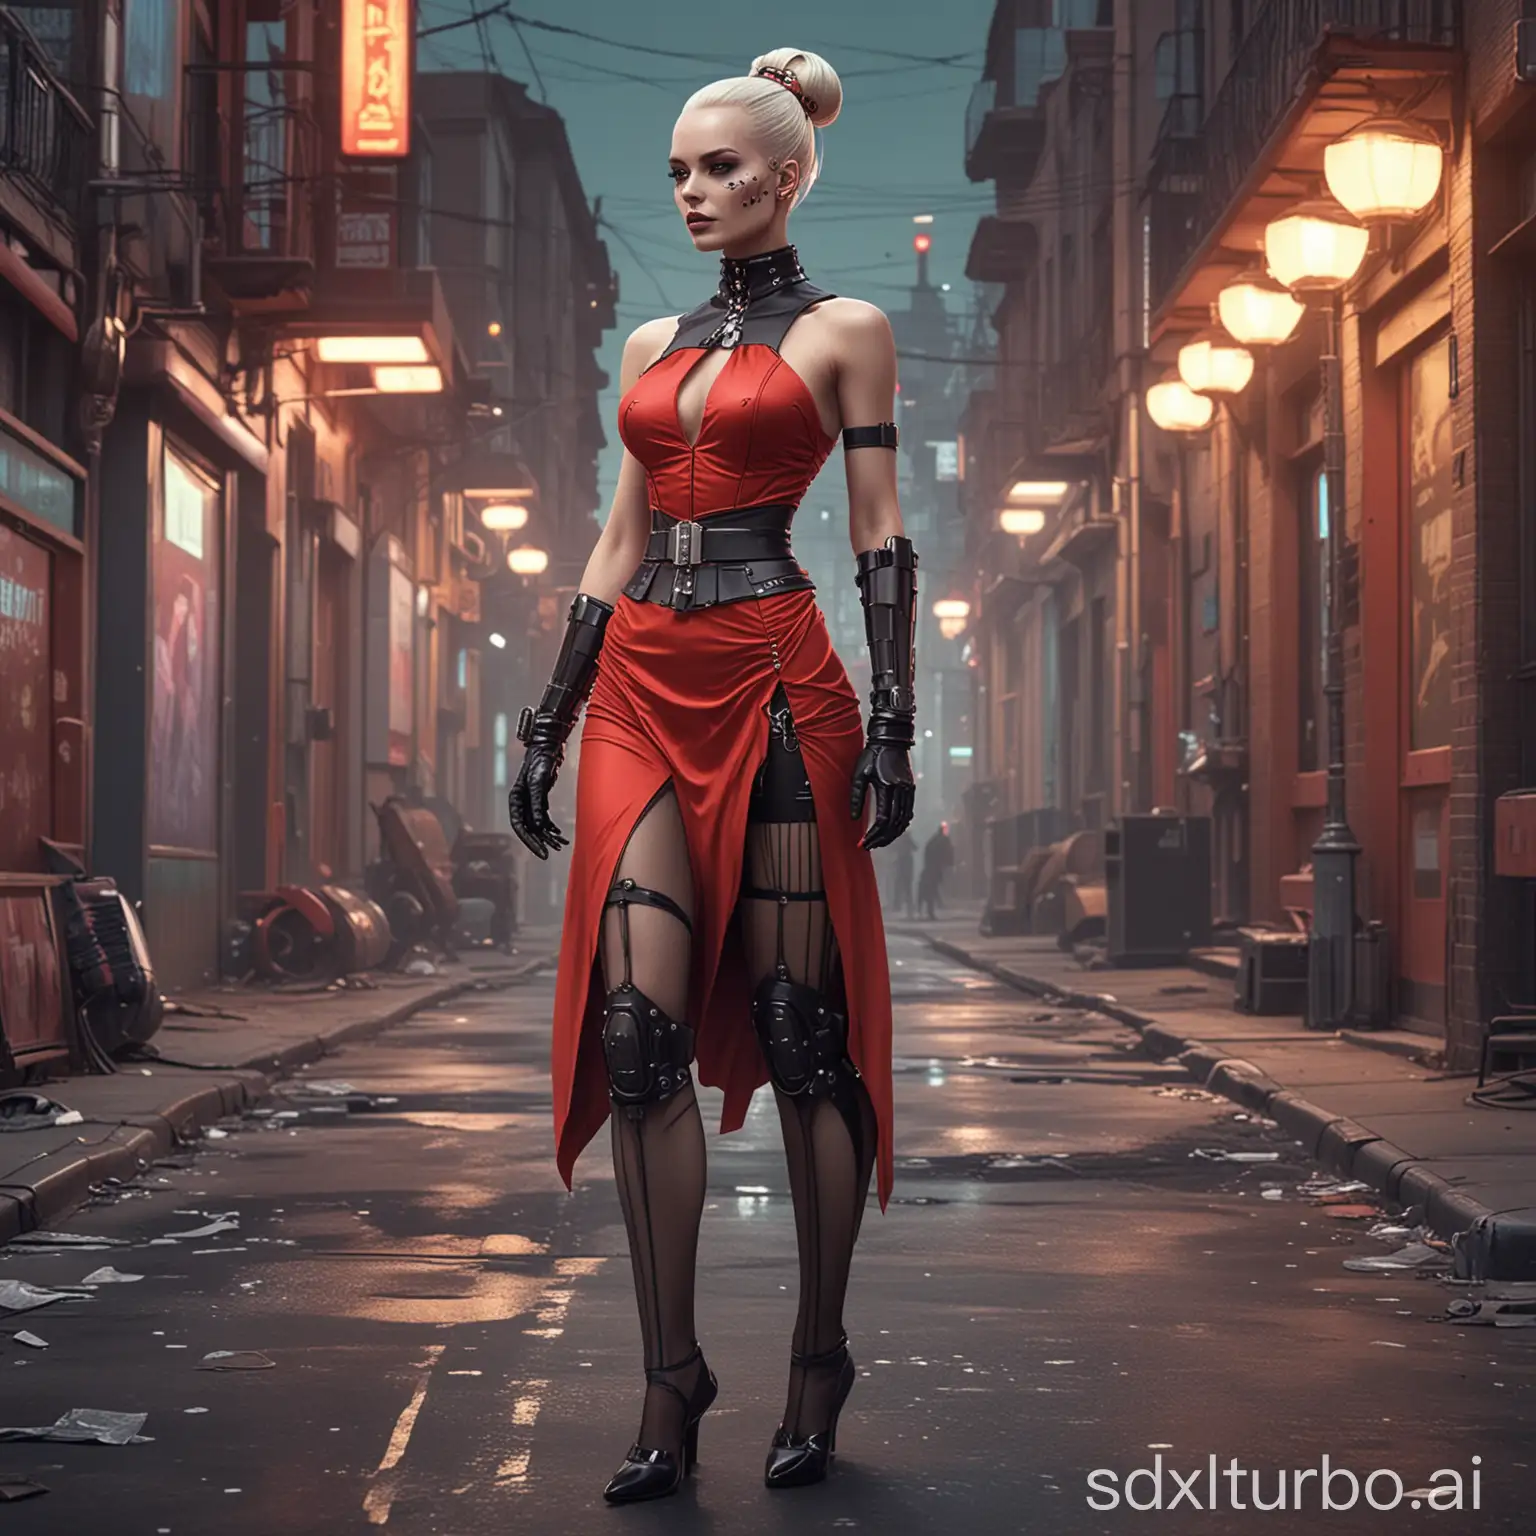 Futuristic-Android-Lady-in-Scarlet-Evening-Dress-Strides-Through-Retro-City